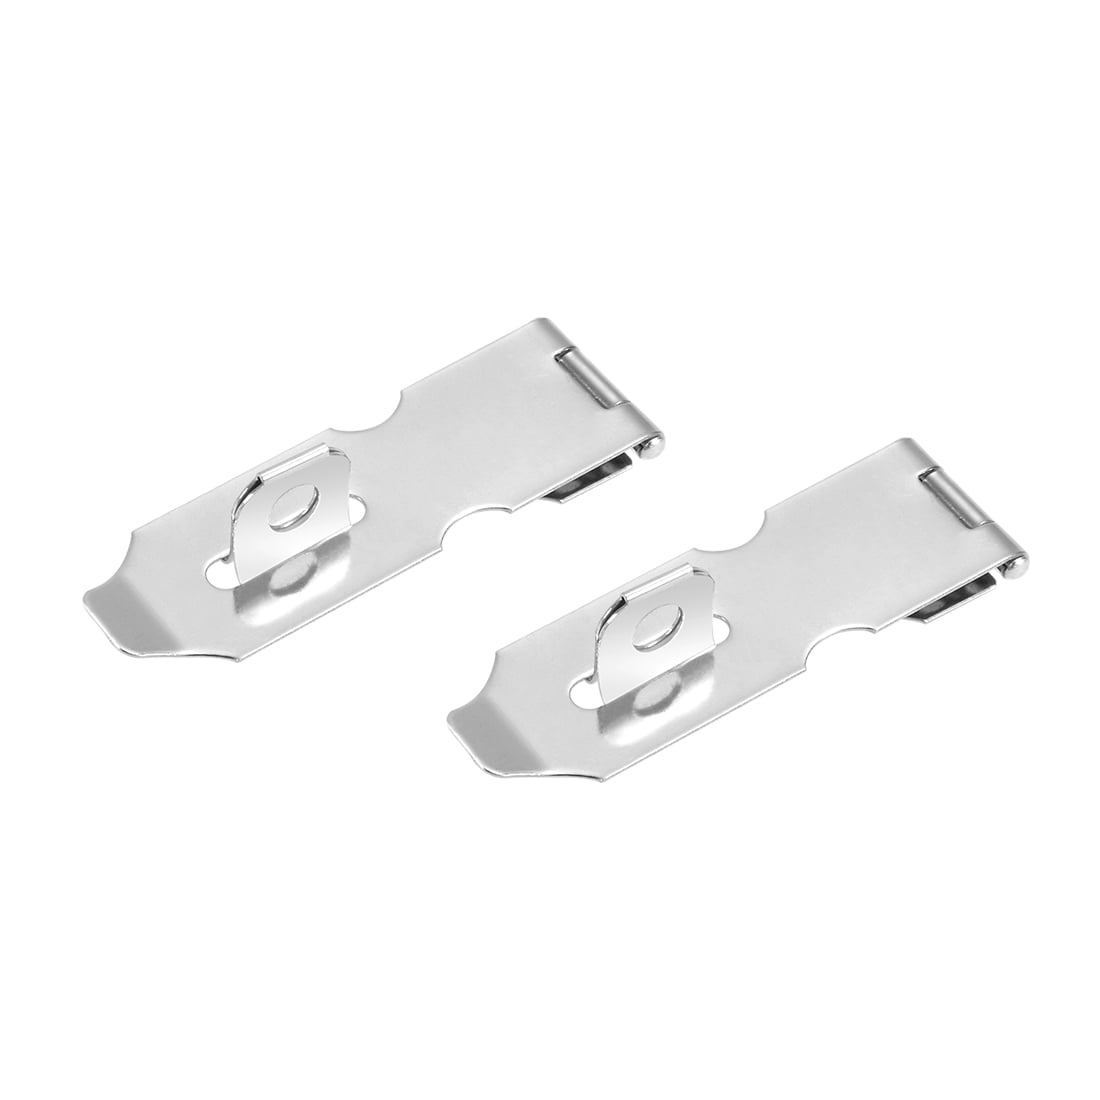 Yinpecly Stainless Steel Hasp Staple Padlock Latch 2.91 x 1.14 x 0.51 LxW Silver Tone 2Pcs for Furniture Cupboard Door 